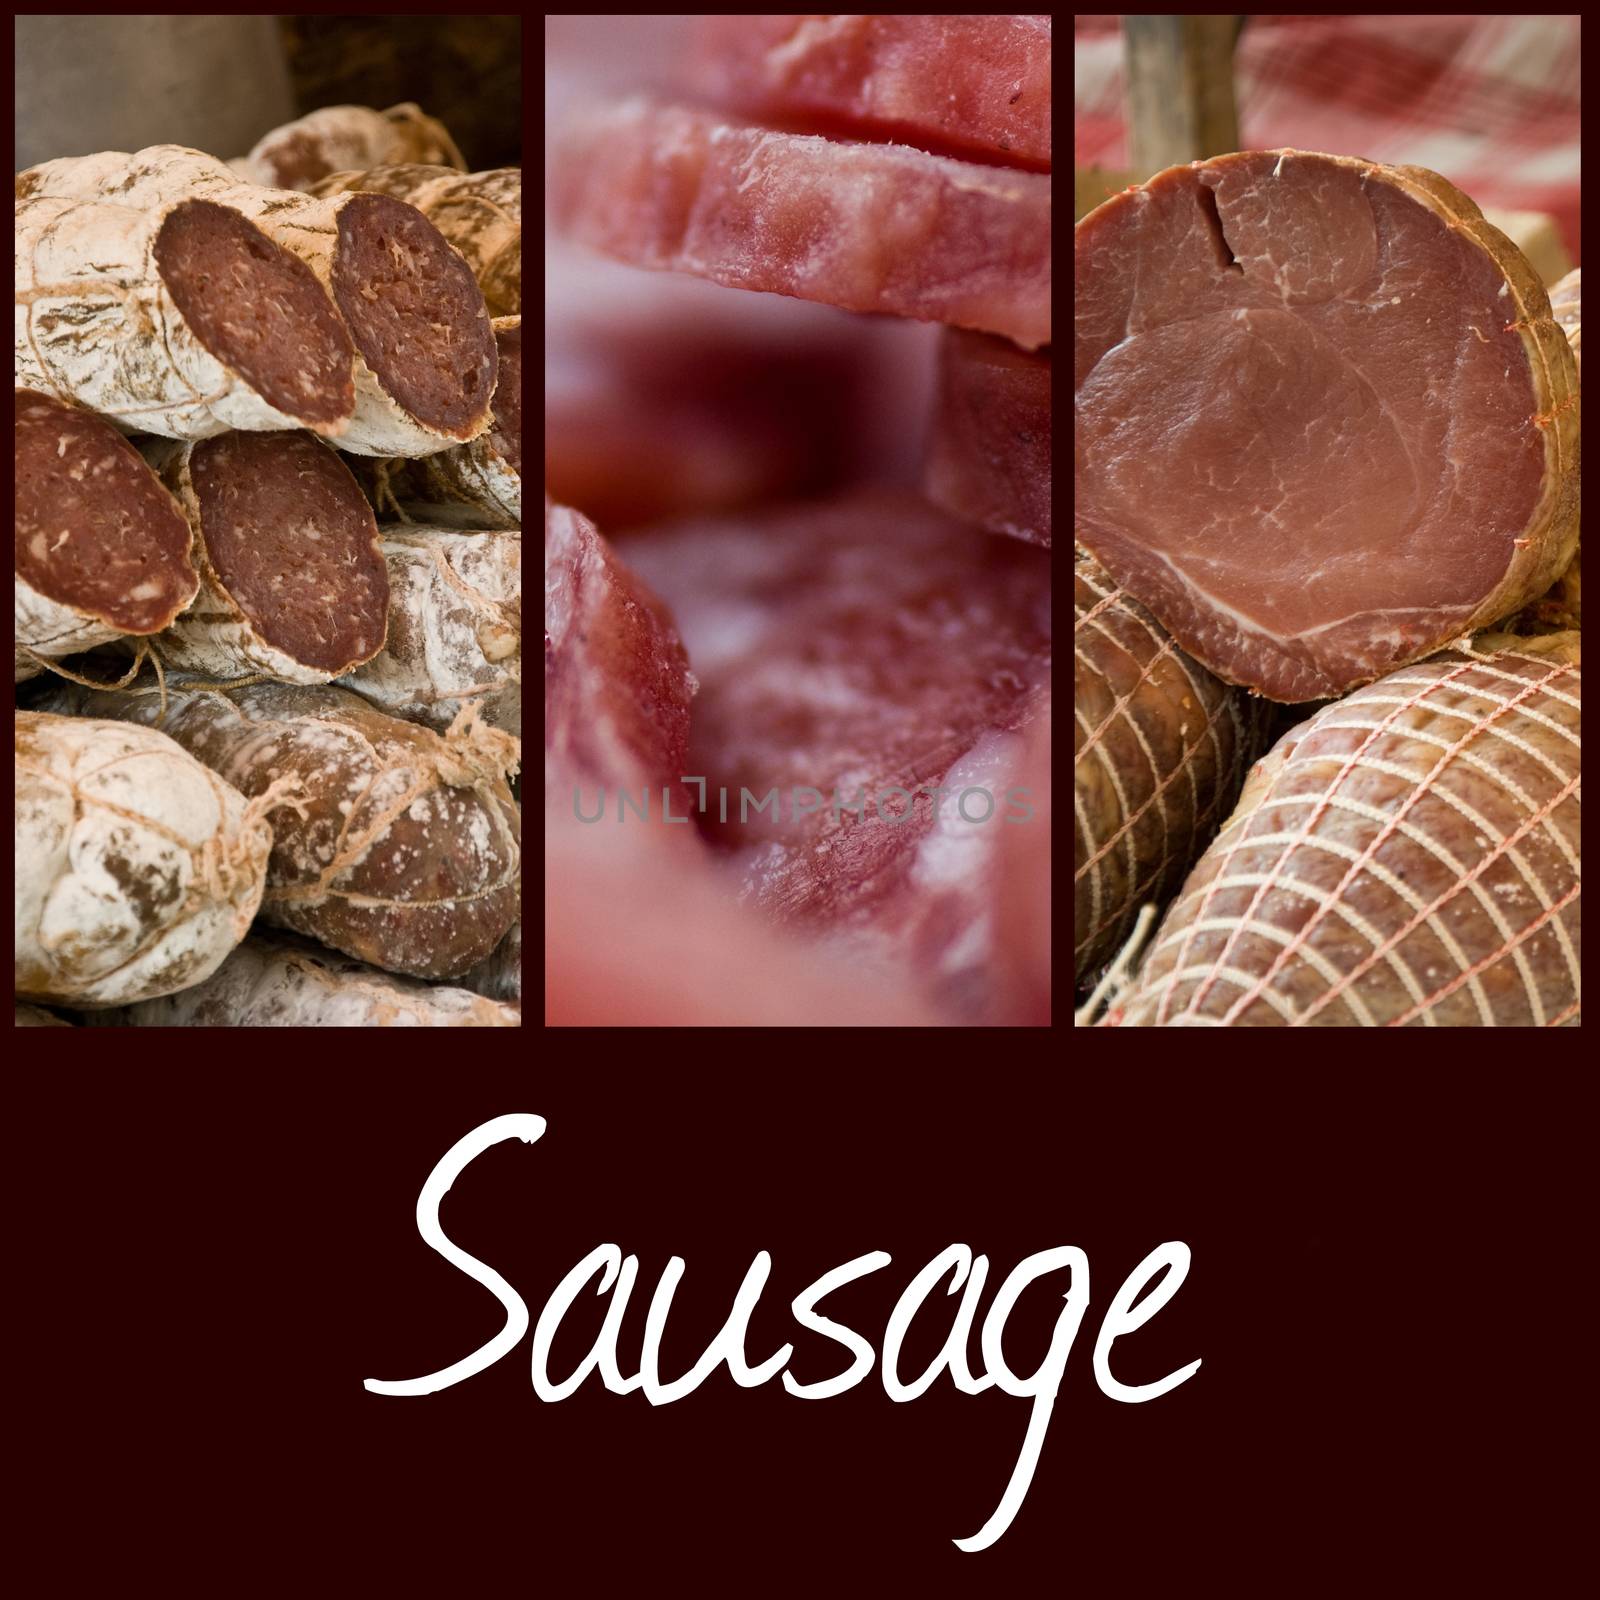 Sausage at a French Market closeup collage